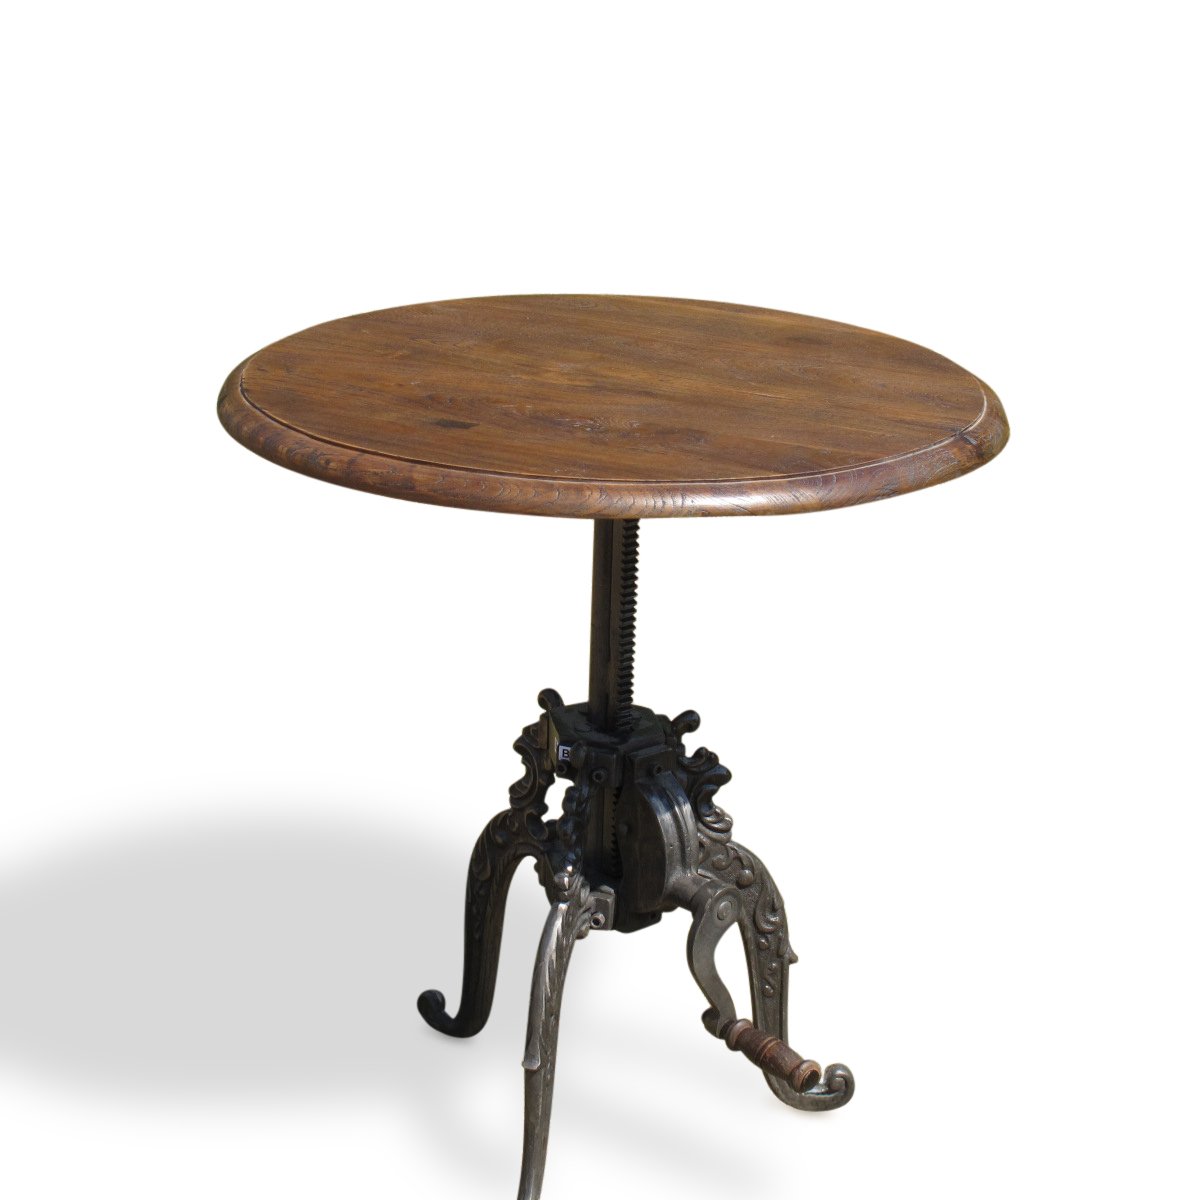 Adjustable Height Round Table - Industrial Style | Indigo Oriental Antiques